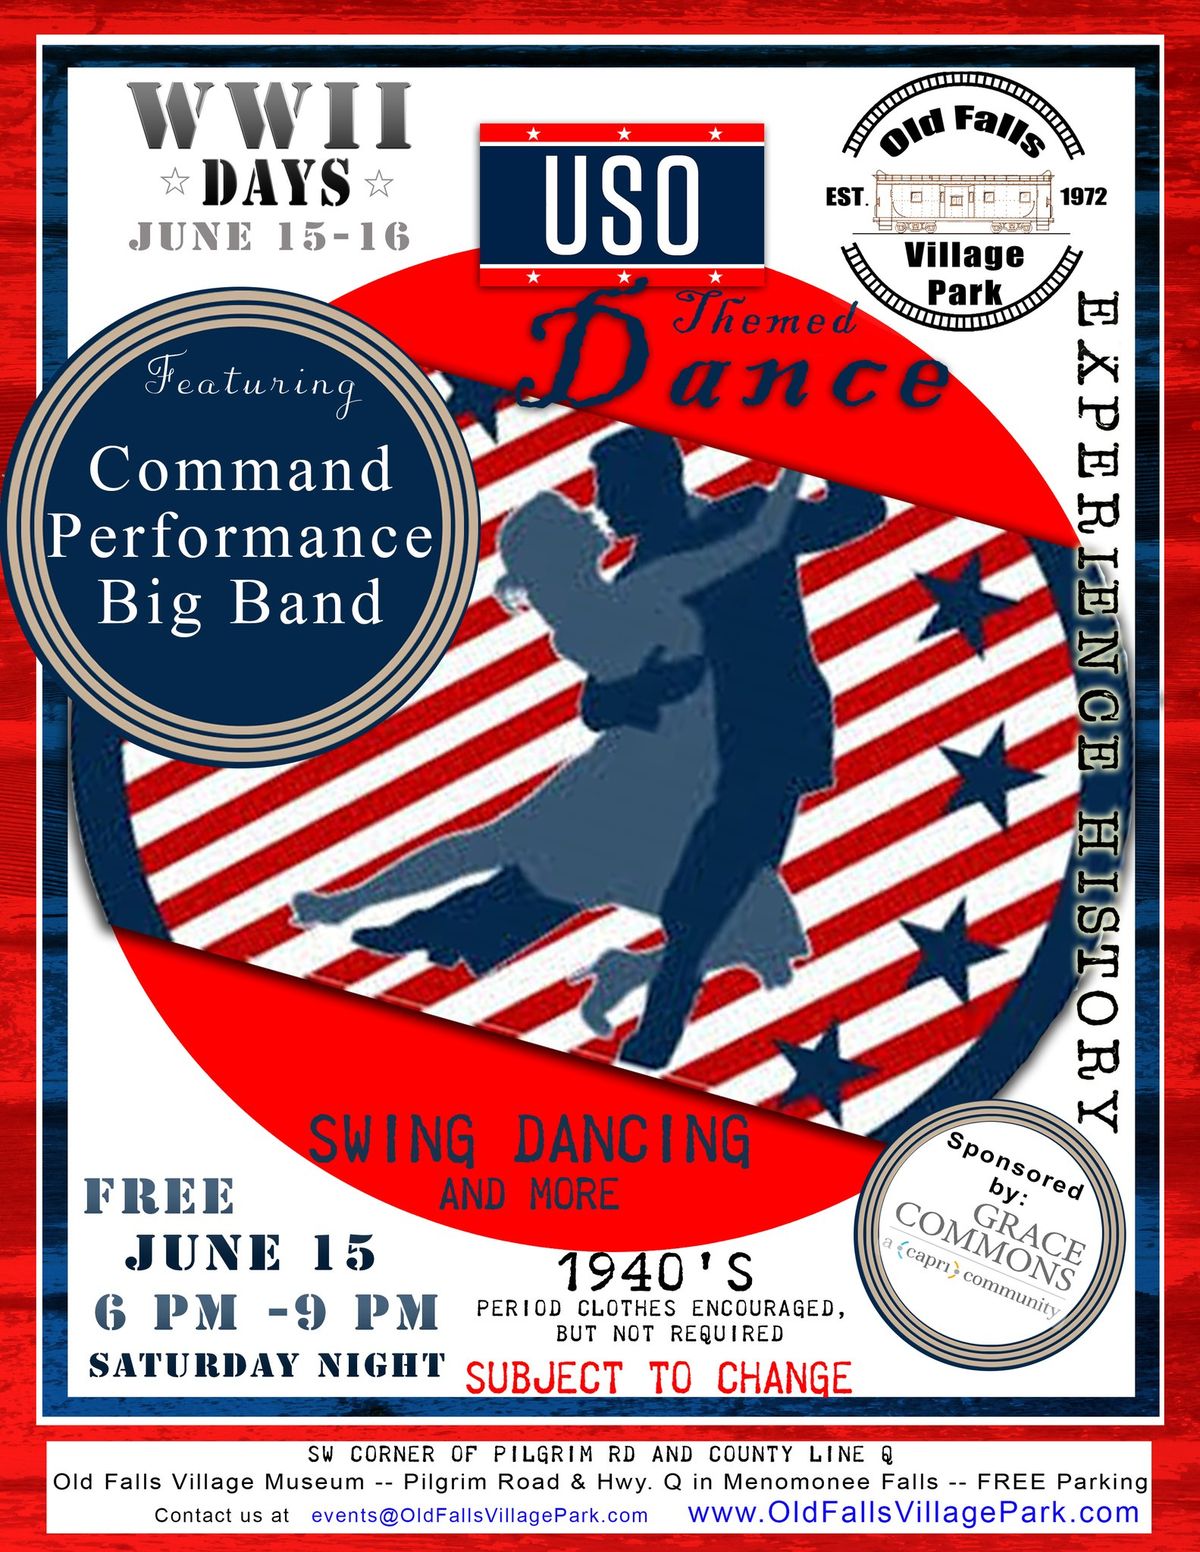 USO Themed Concert and Dance